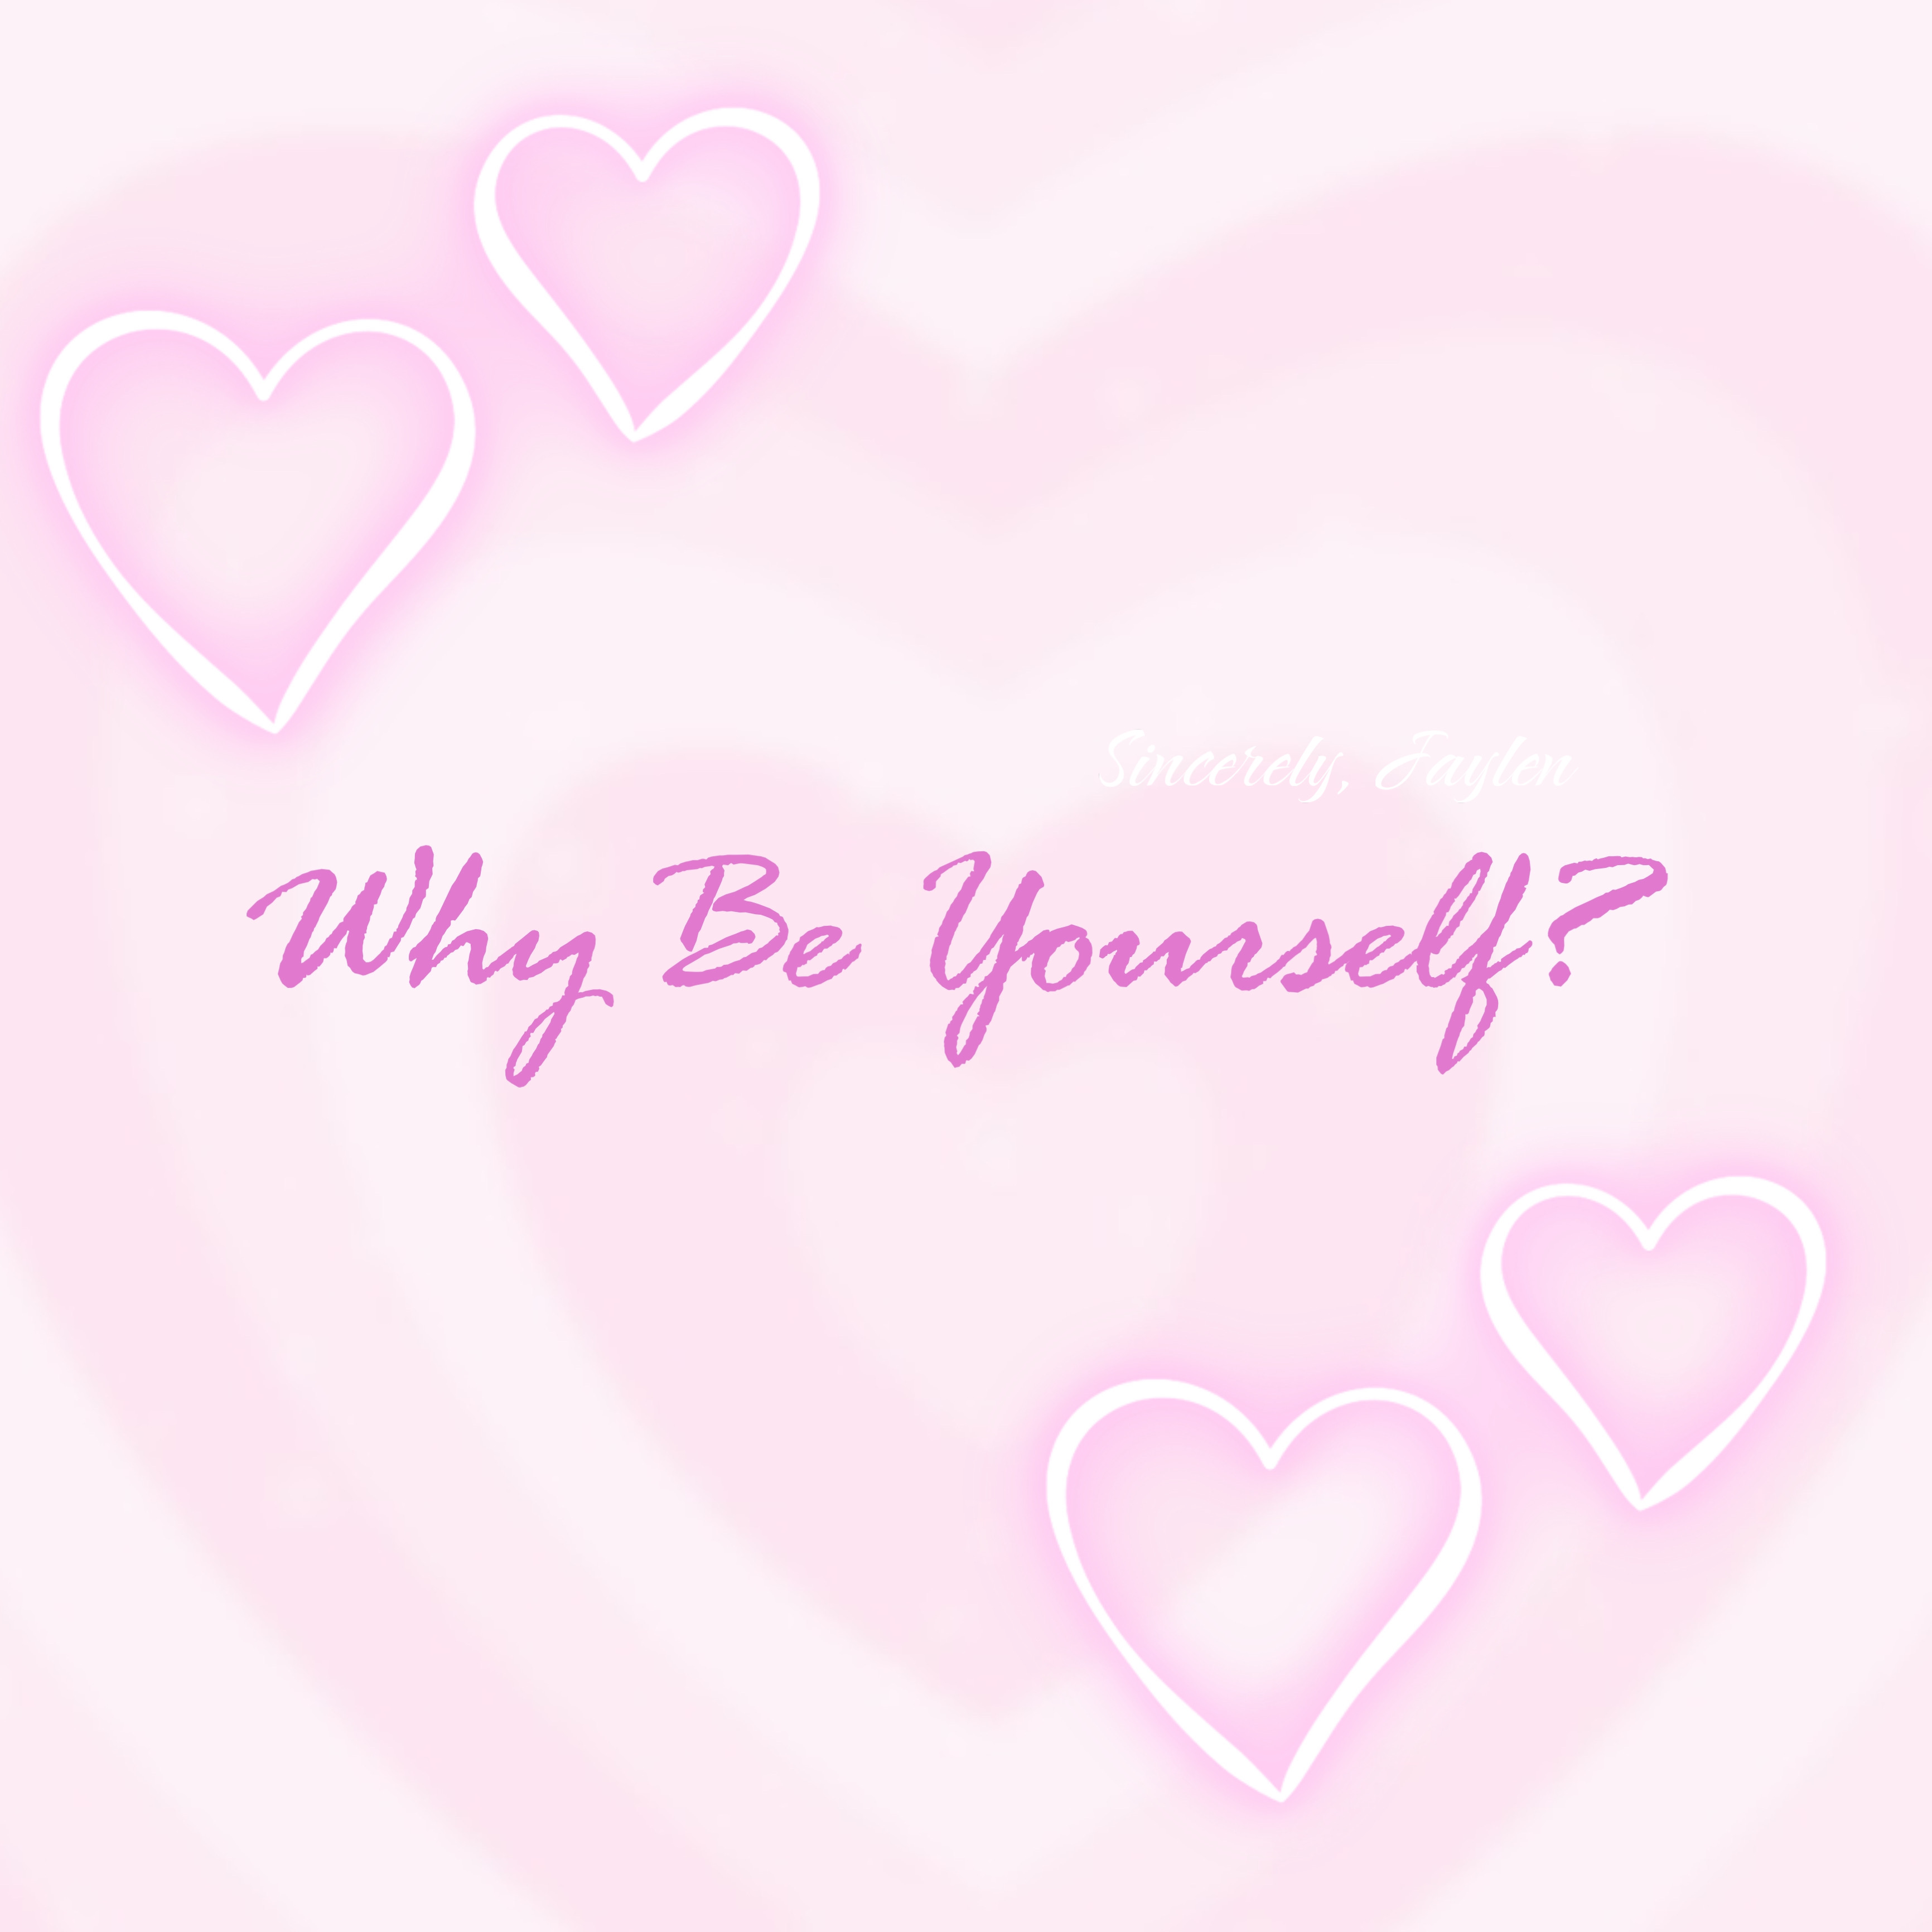 Why Be Yourself?